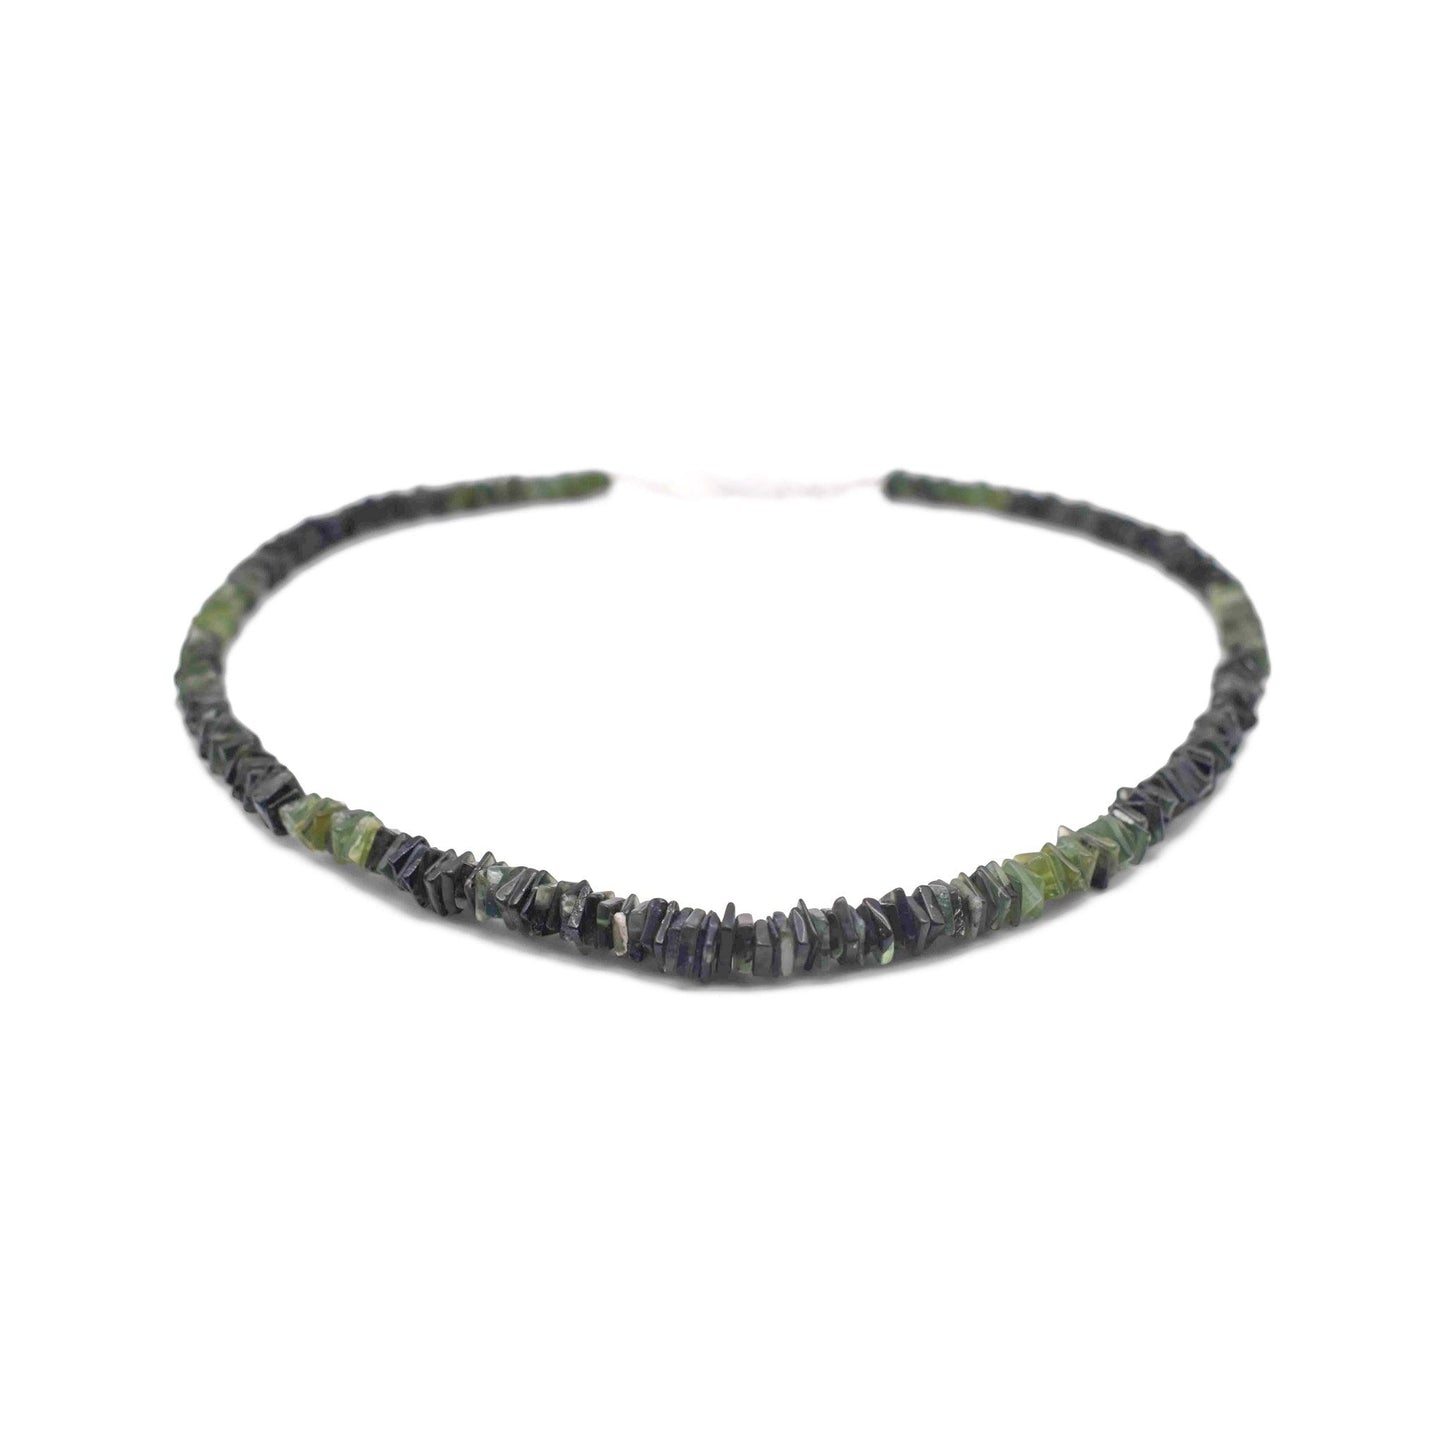 Serpentine Heishi Necklace green and black color beads